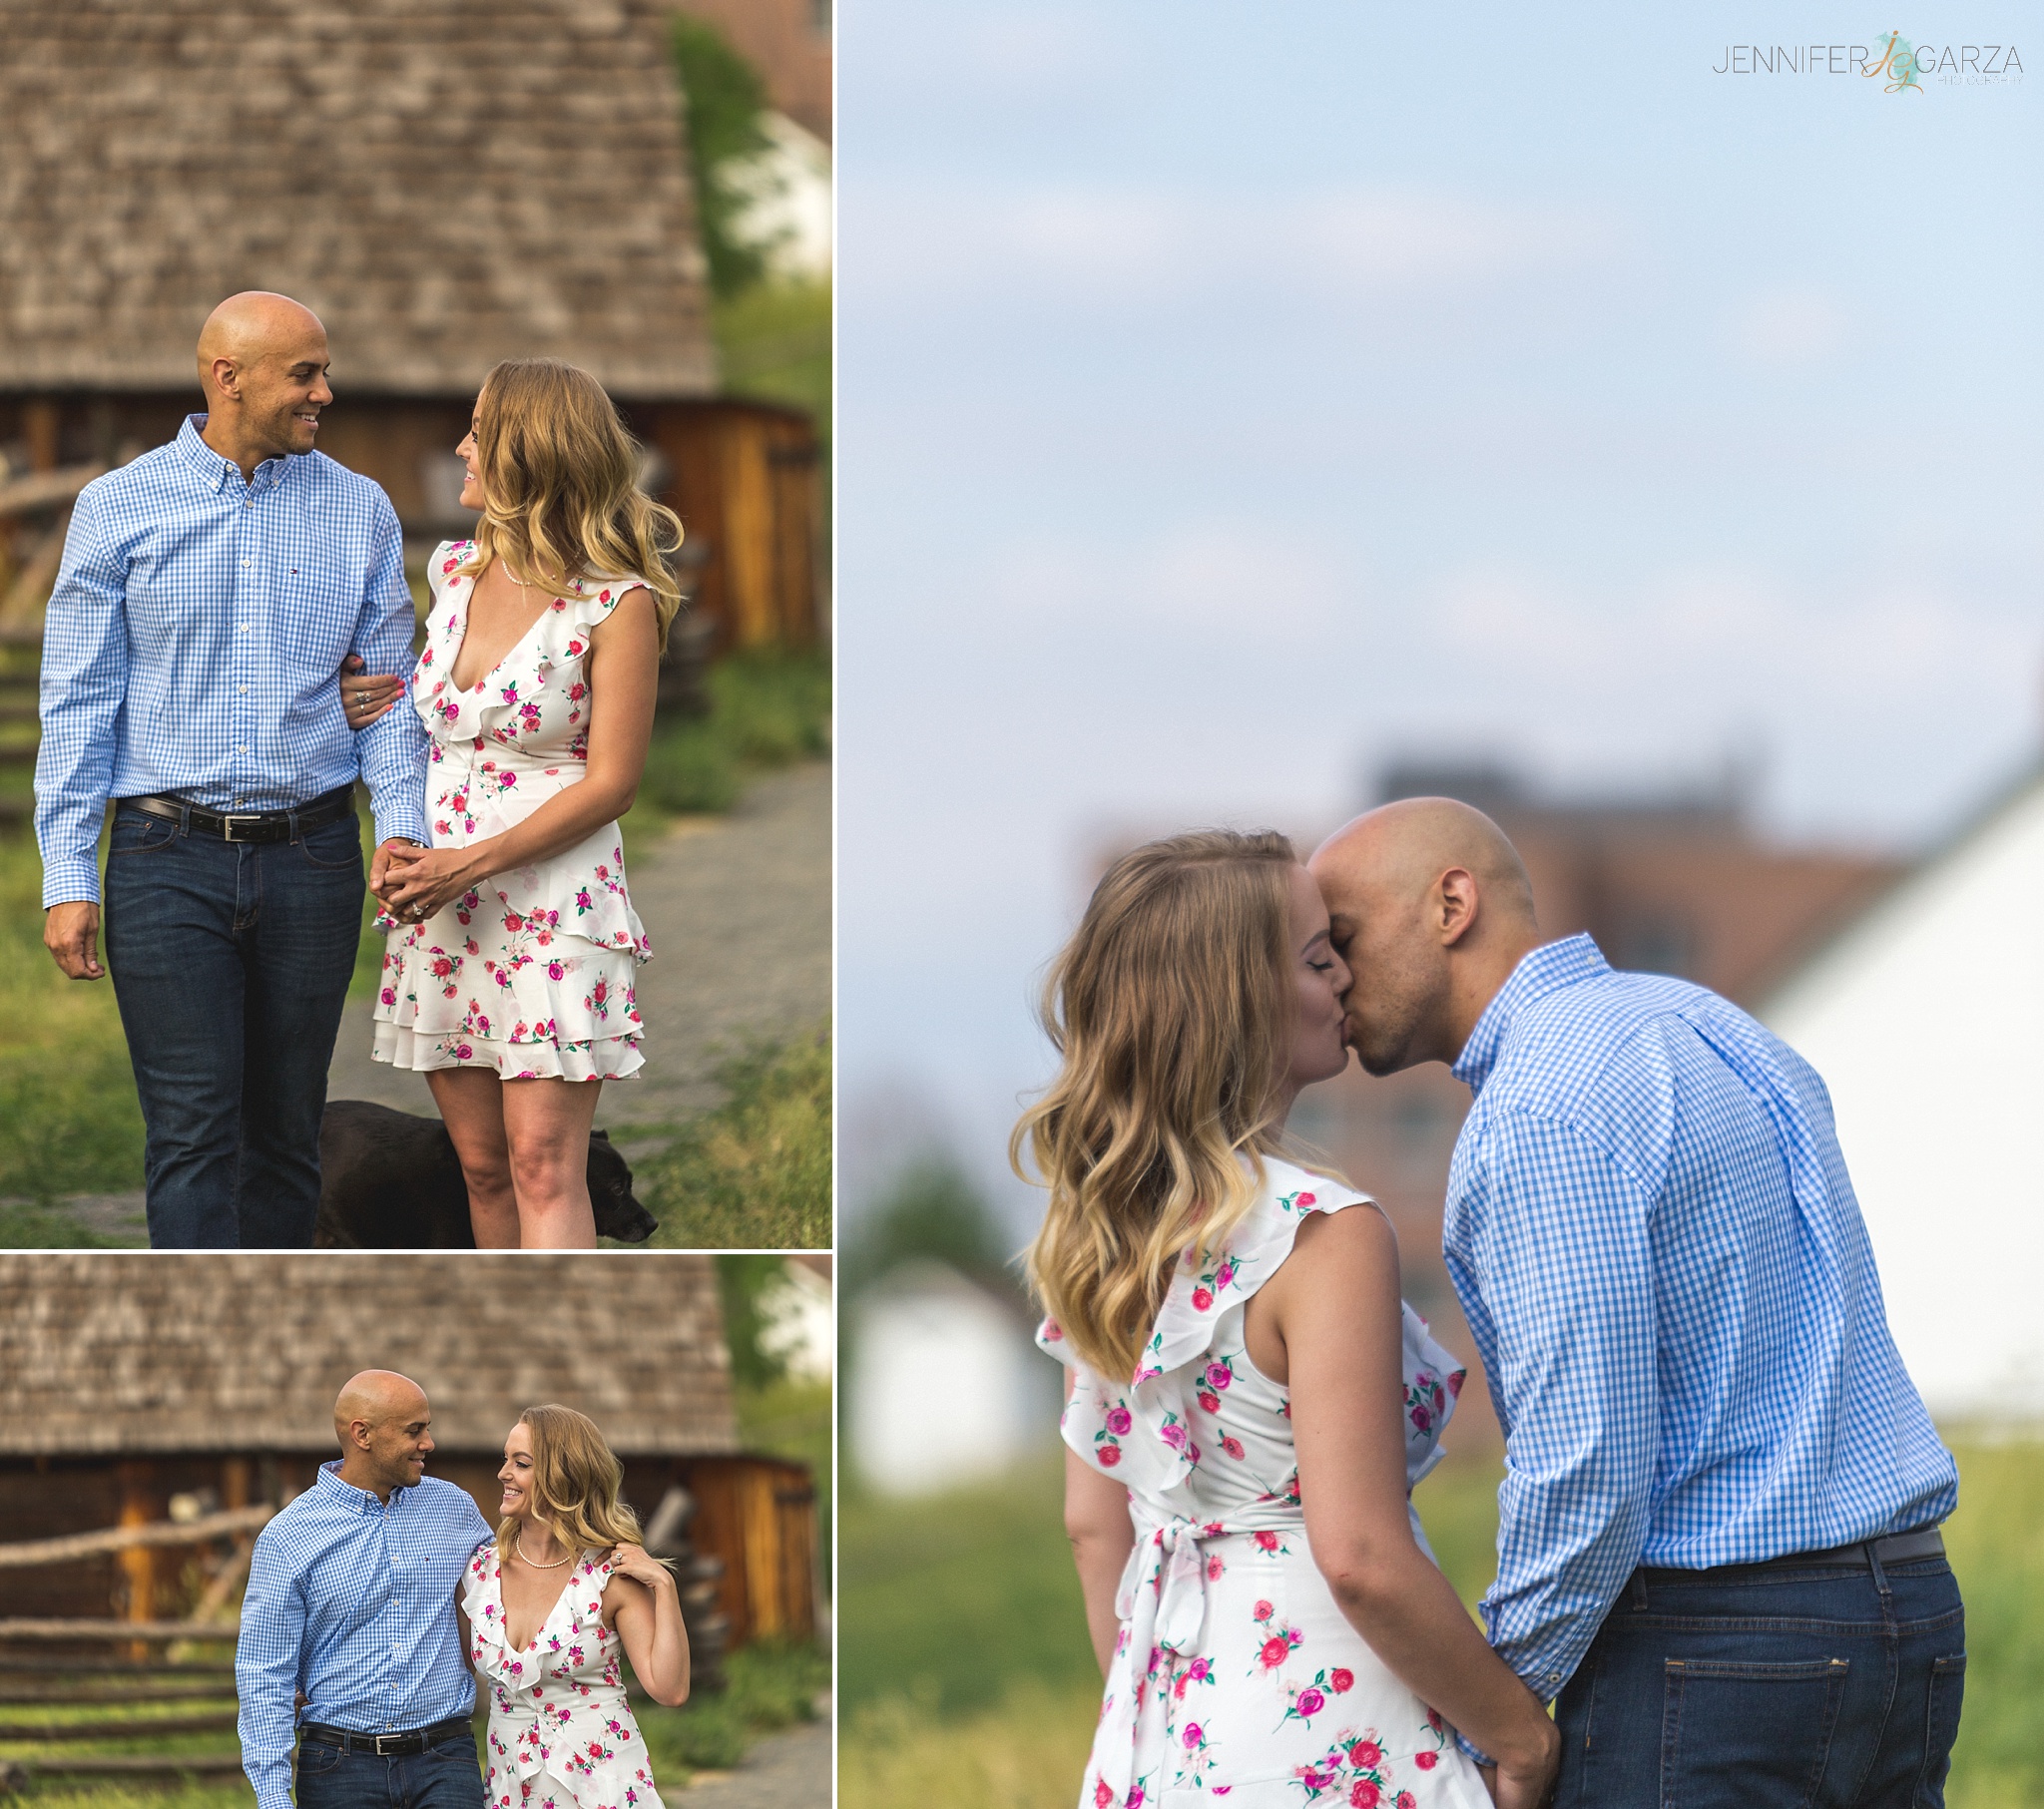 Kyley & Brian's Engagement Session at Clear Creek History Park. Photographed by Jennifer Garza Photography.